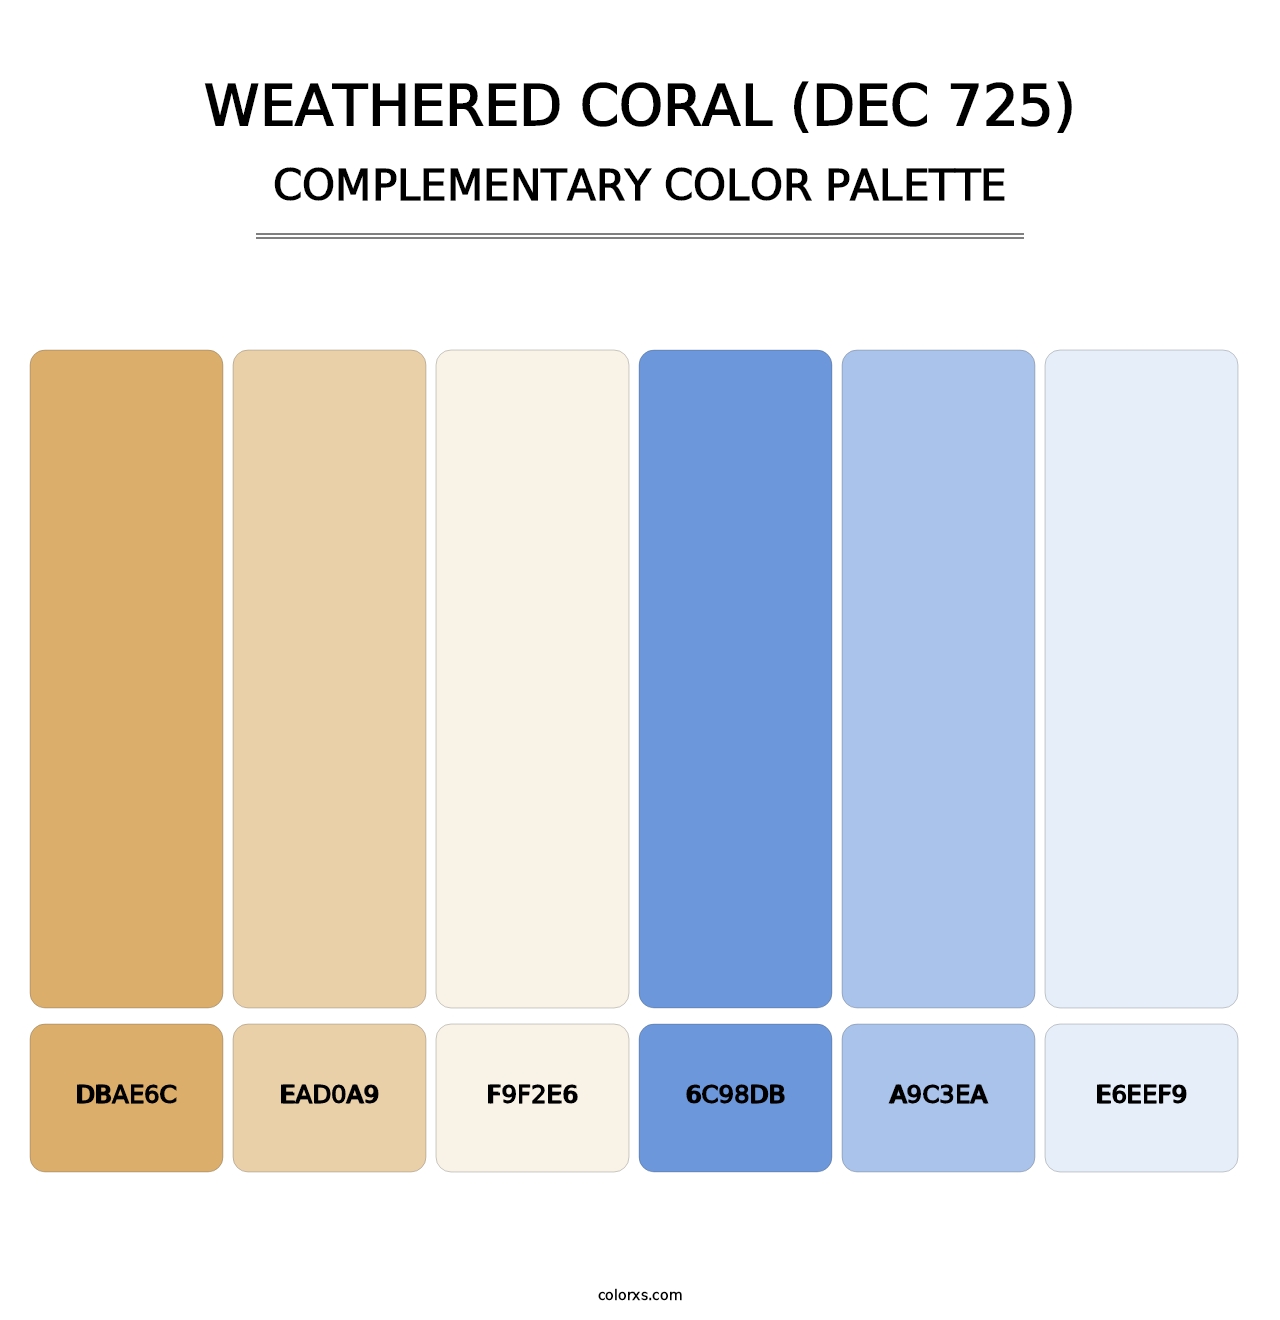 Weathered Coral (DEC 725) - Complementary Color Palette